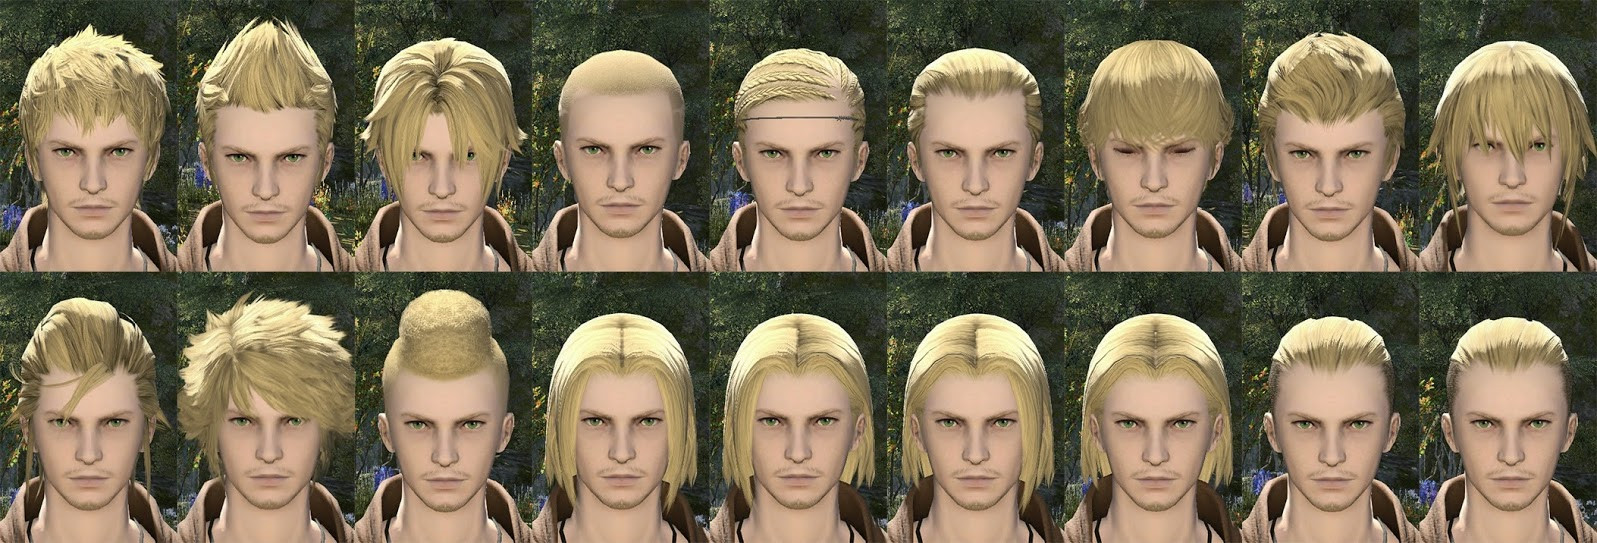 Ffxiv Male Hairstyles
 FFXIV Character Creation